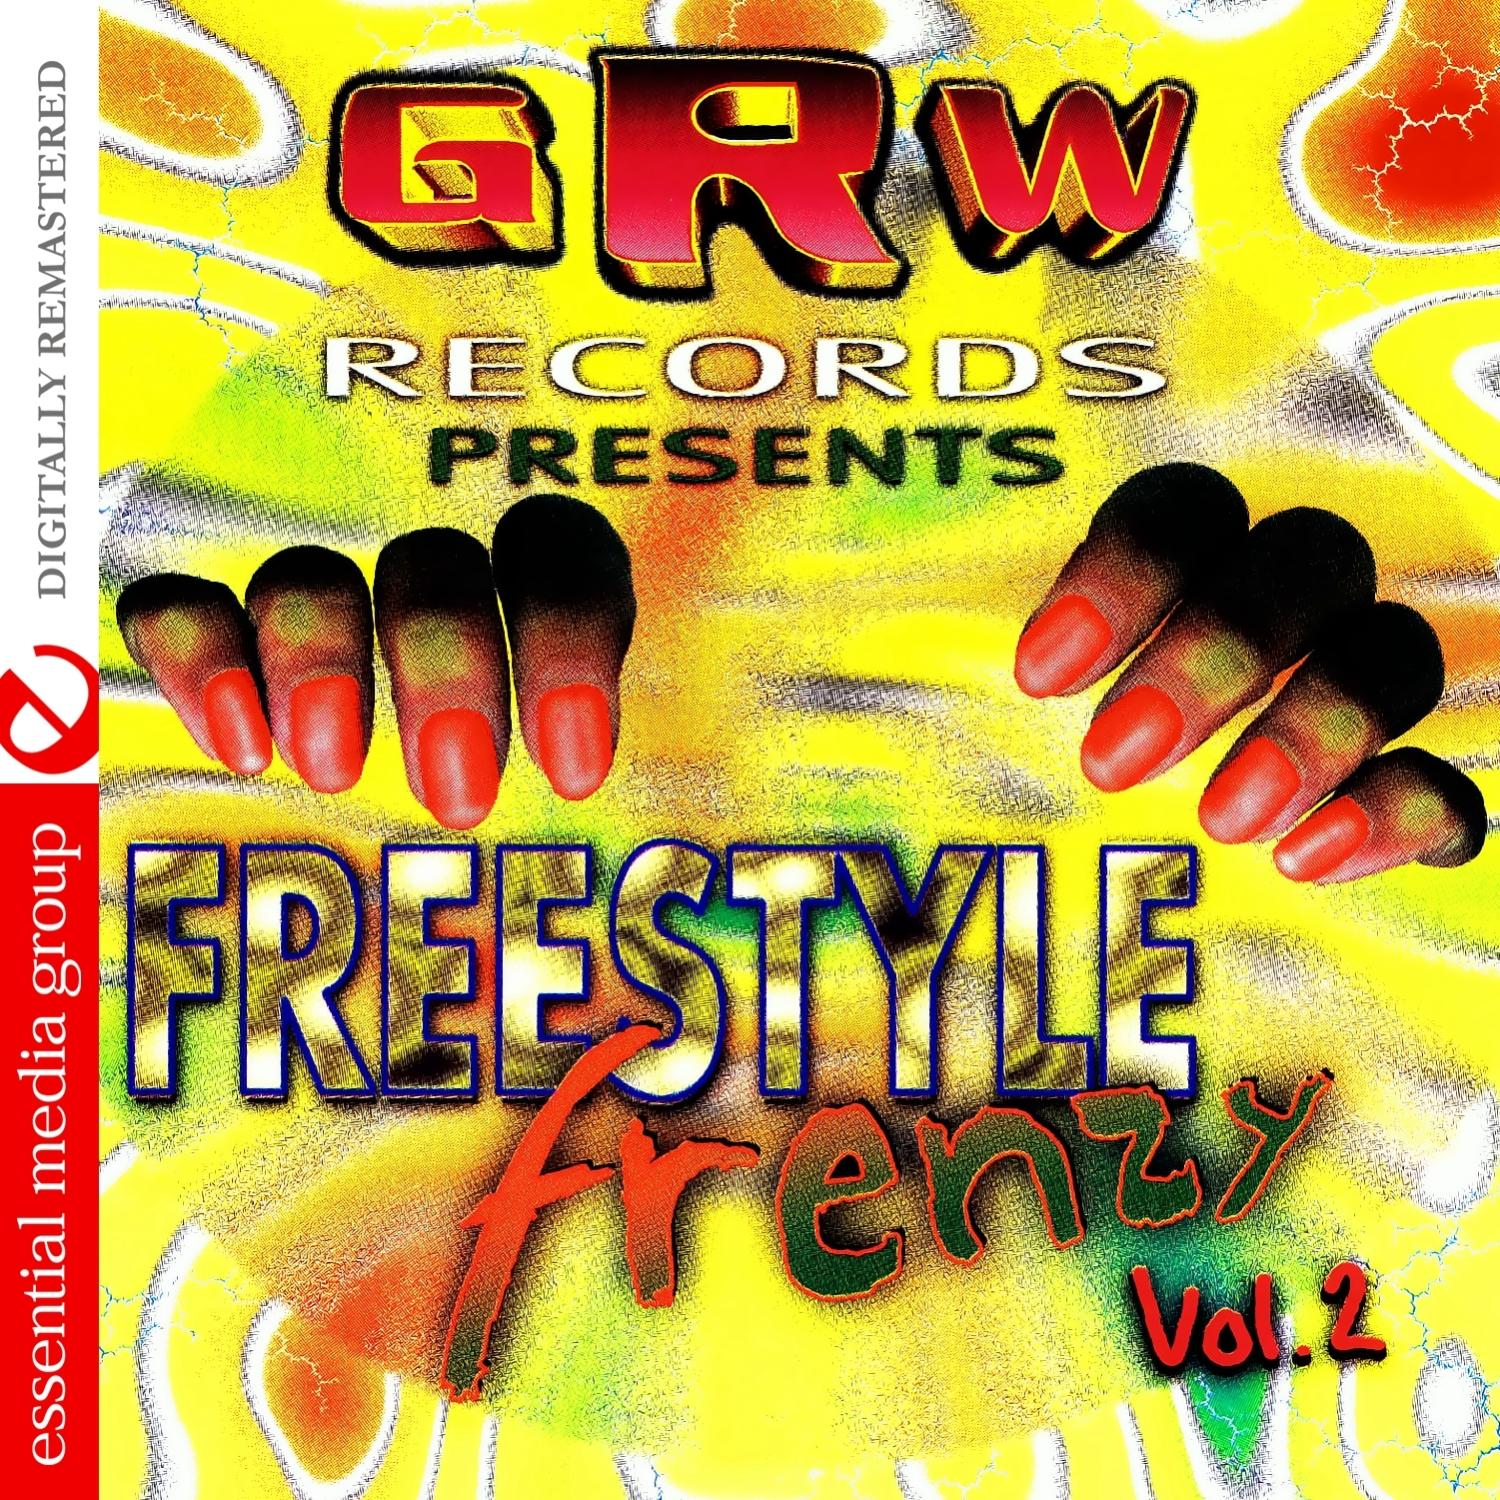 GRW Recordings Presents Freestyle Frenzy Vol. 2 (Digitally Remastered)